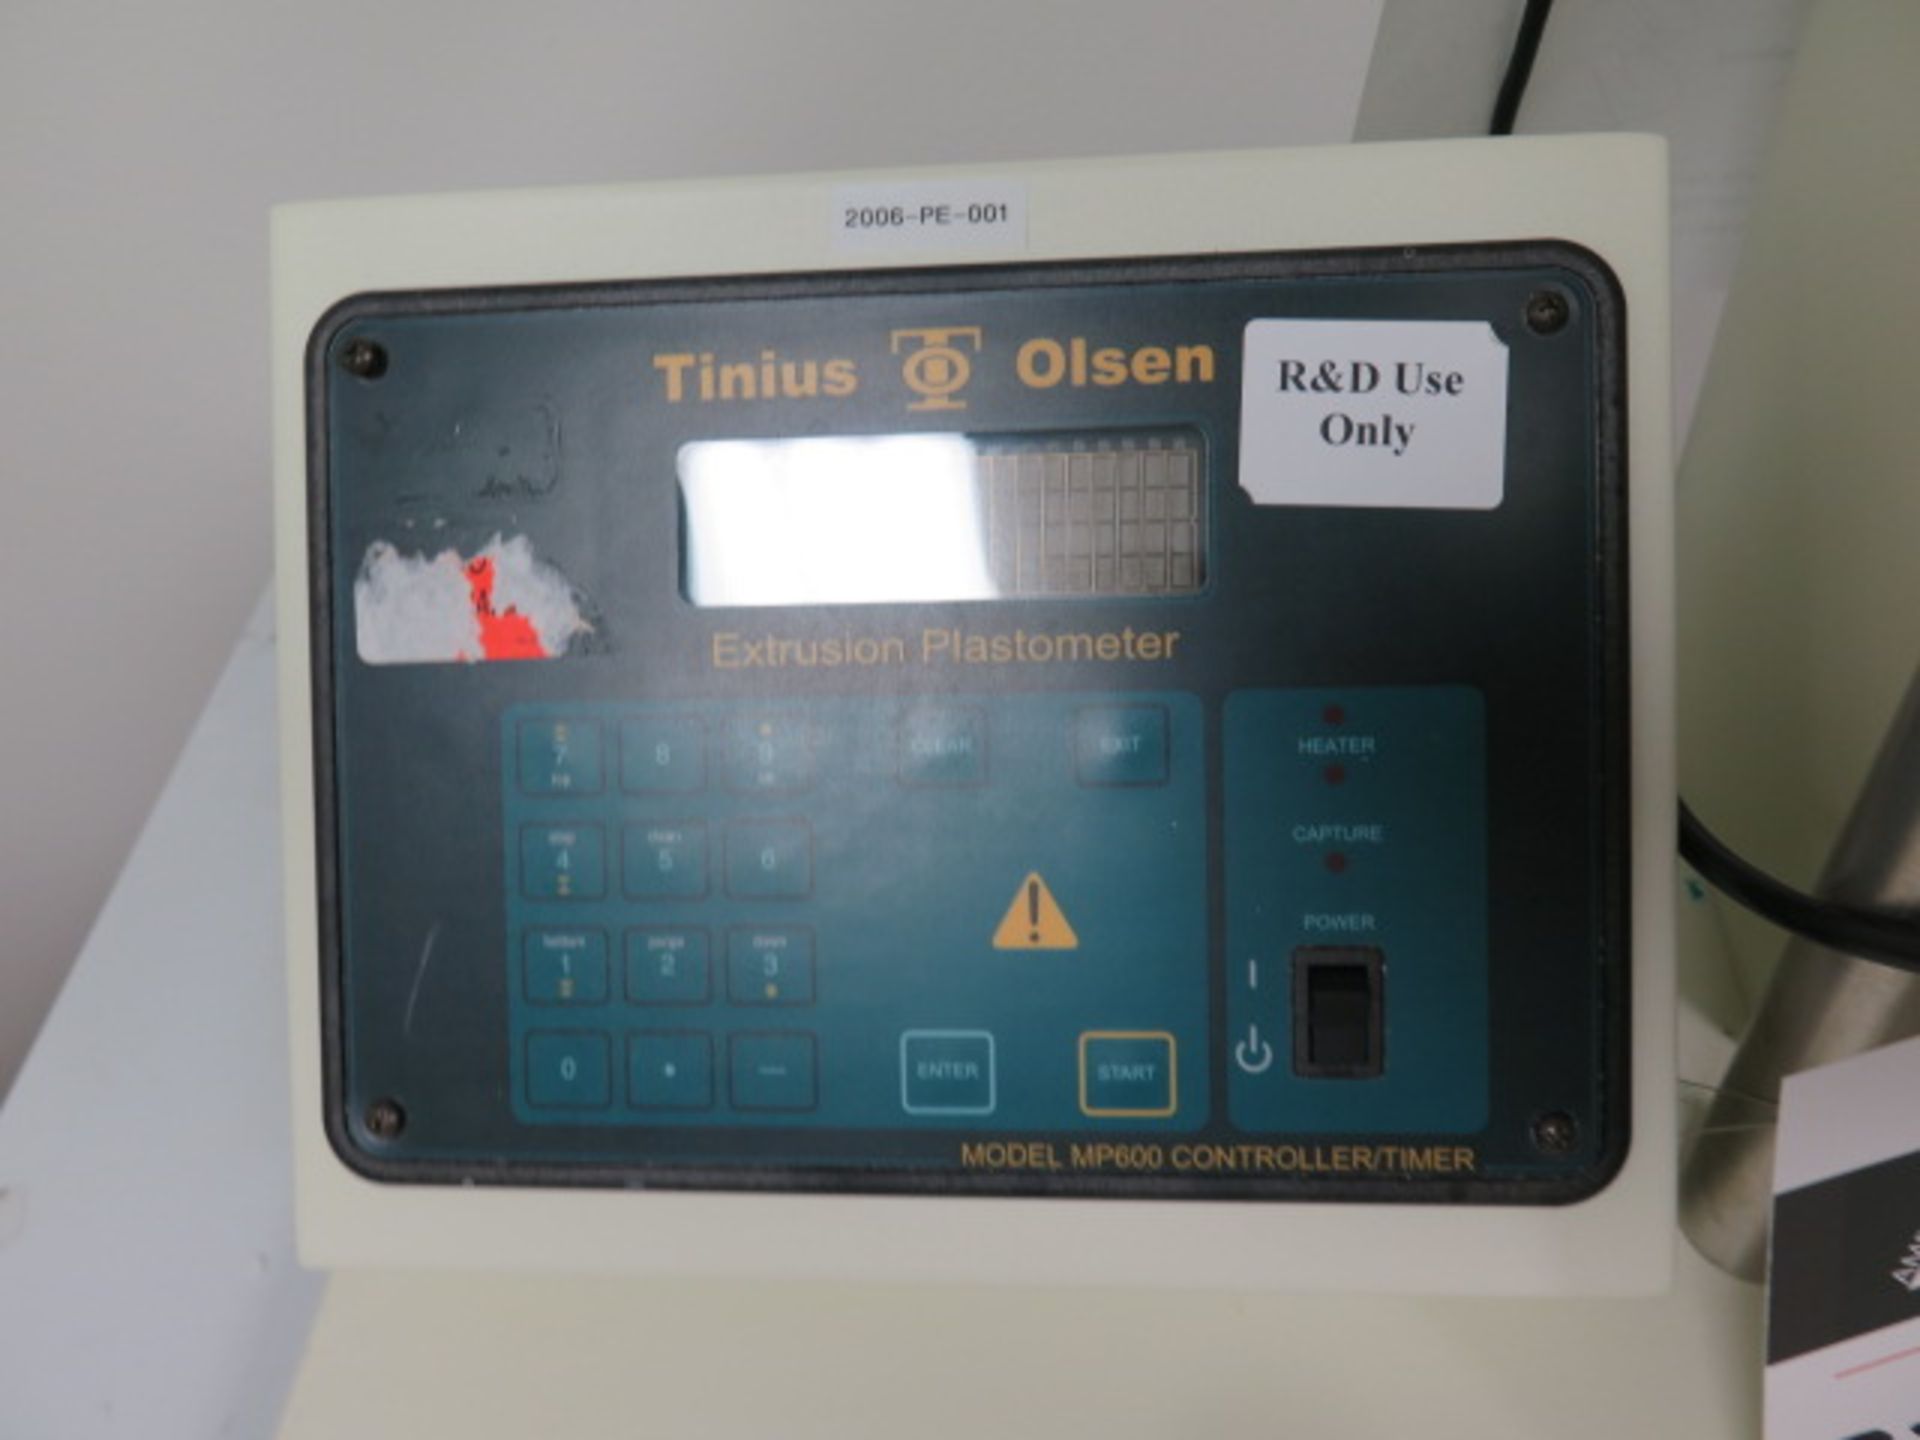 Tinus Olson MP600M Extrusion Plastometer s/n 210493 (SOLD AS-IS - NO WARRANTY) - Image 7 of 8